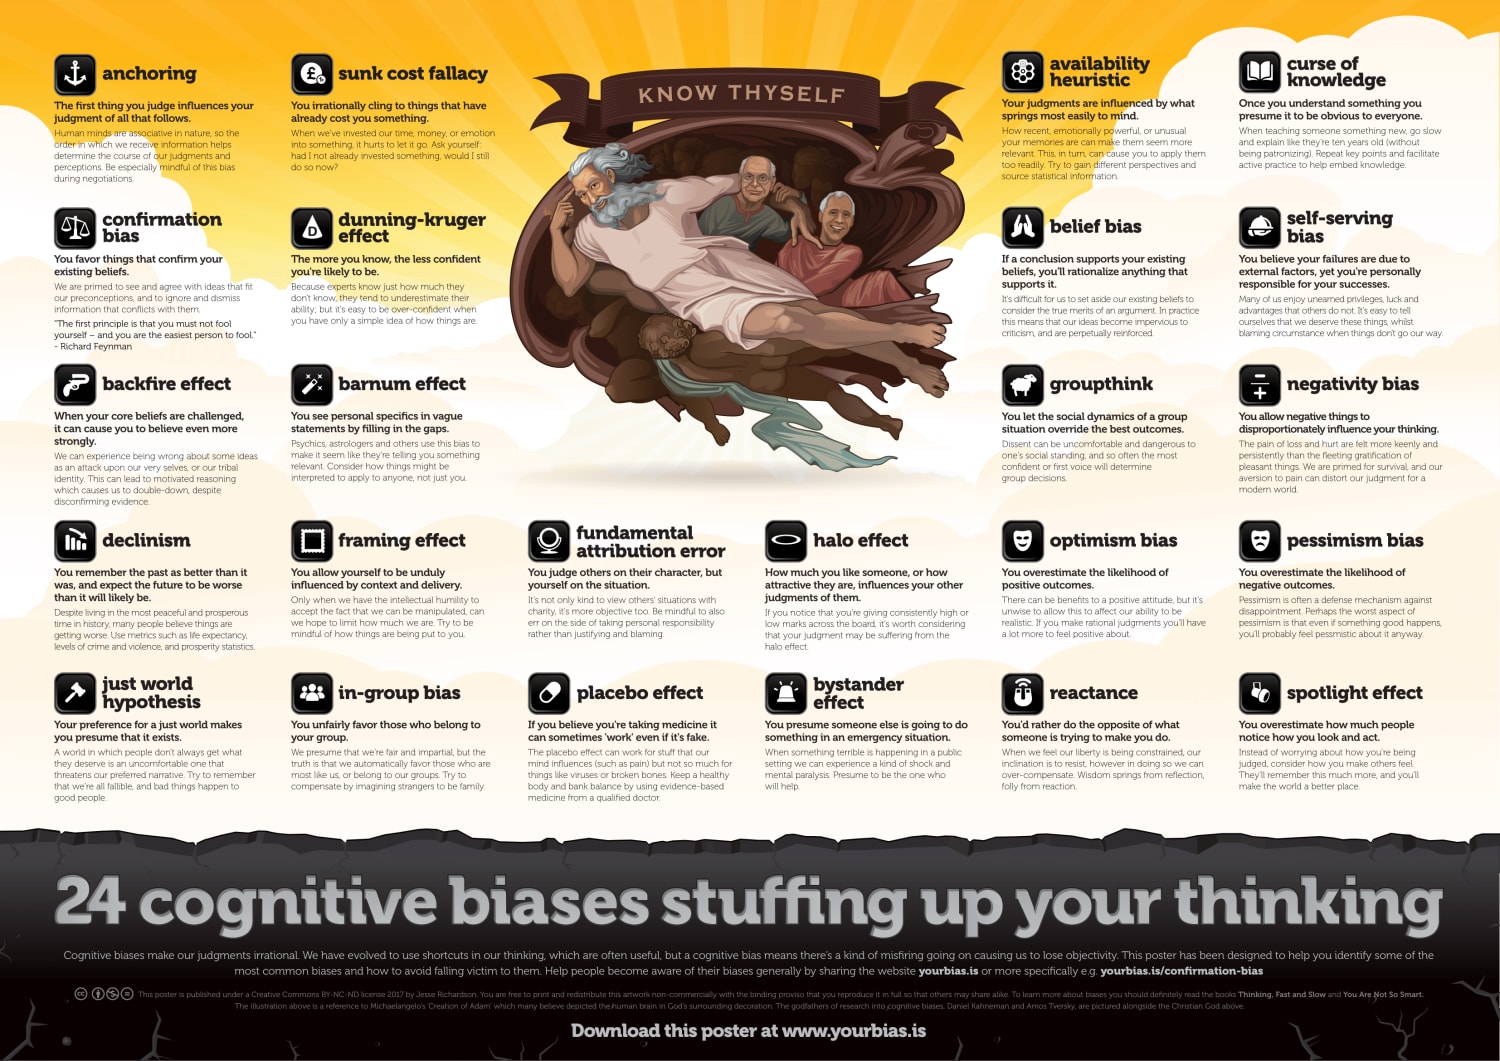 Cognitive biases to watch out for.